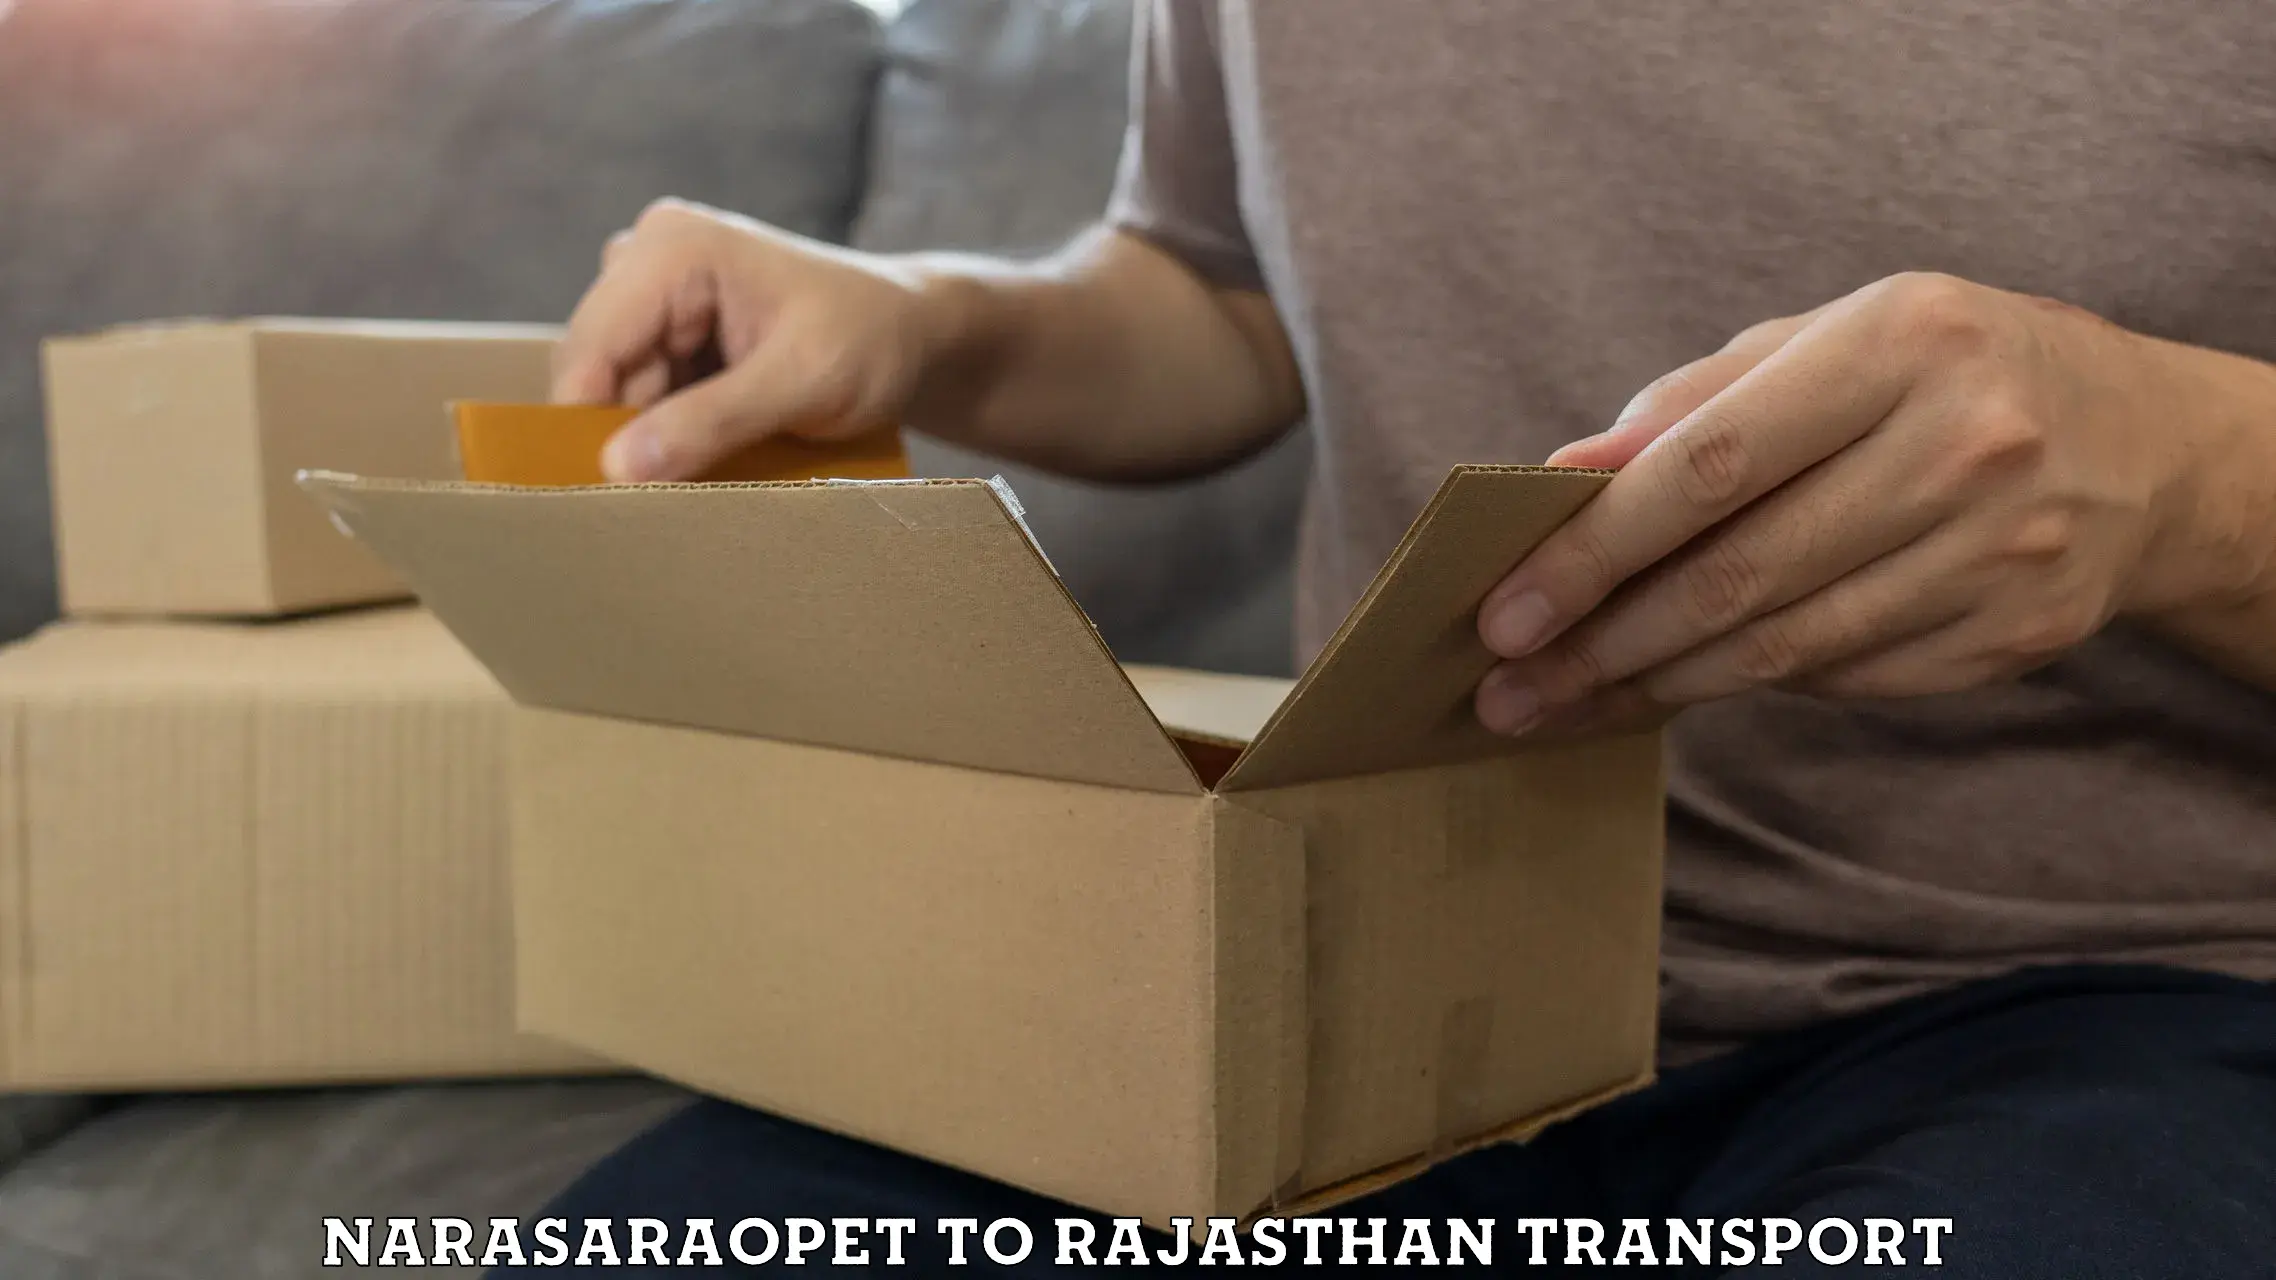 Commercial transport service Narasaraopet to Rajasthan